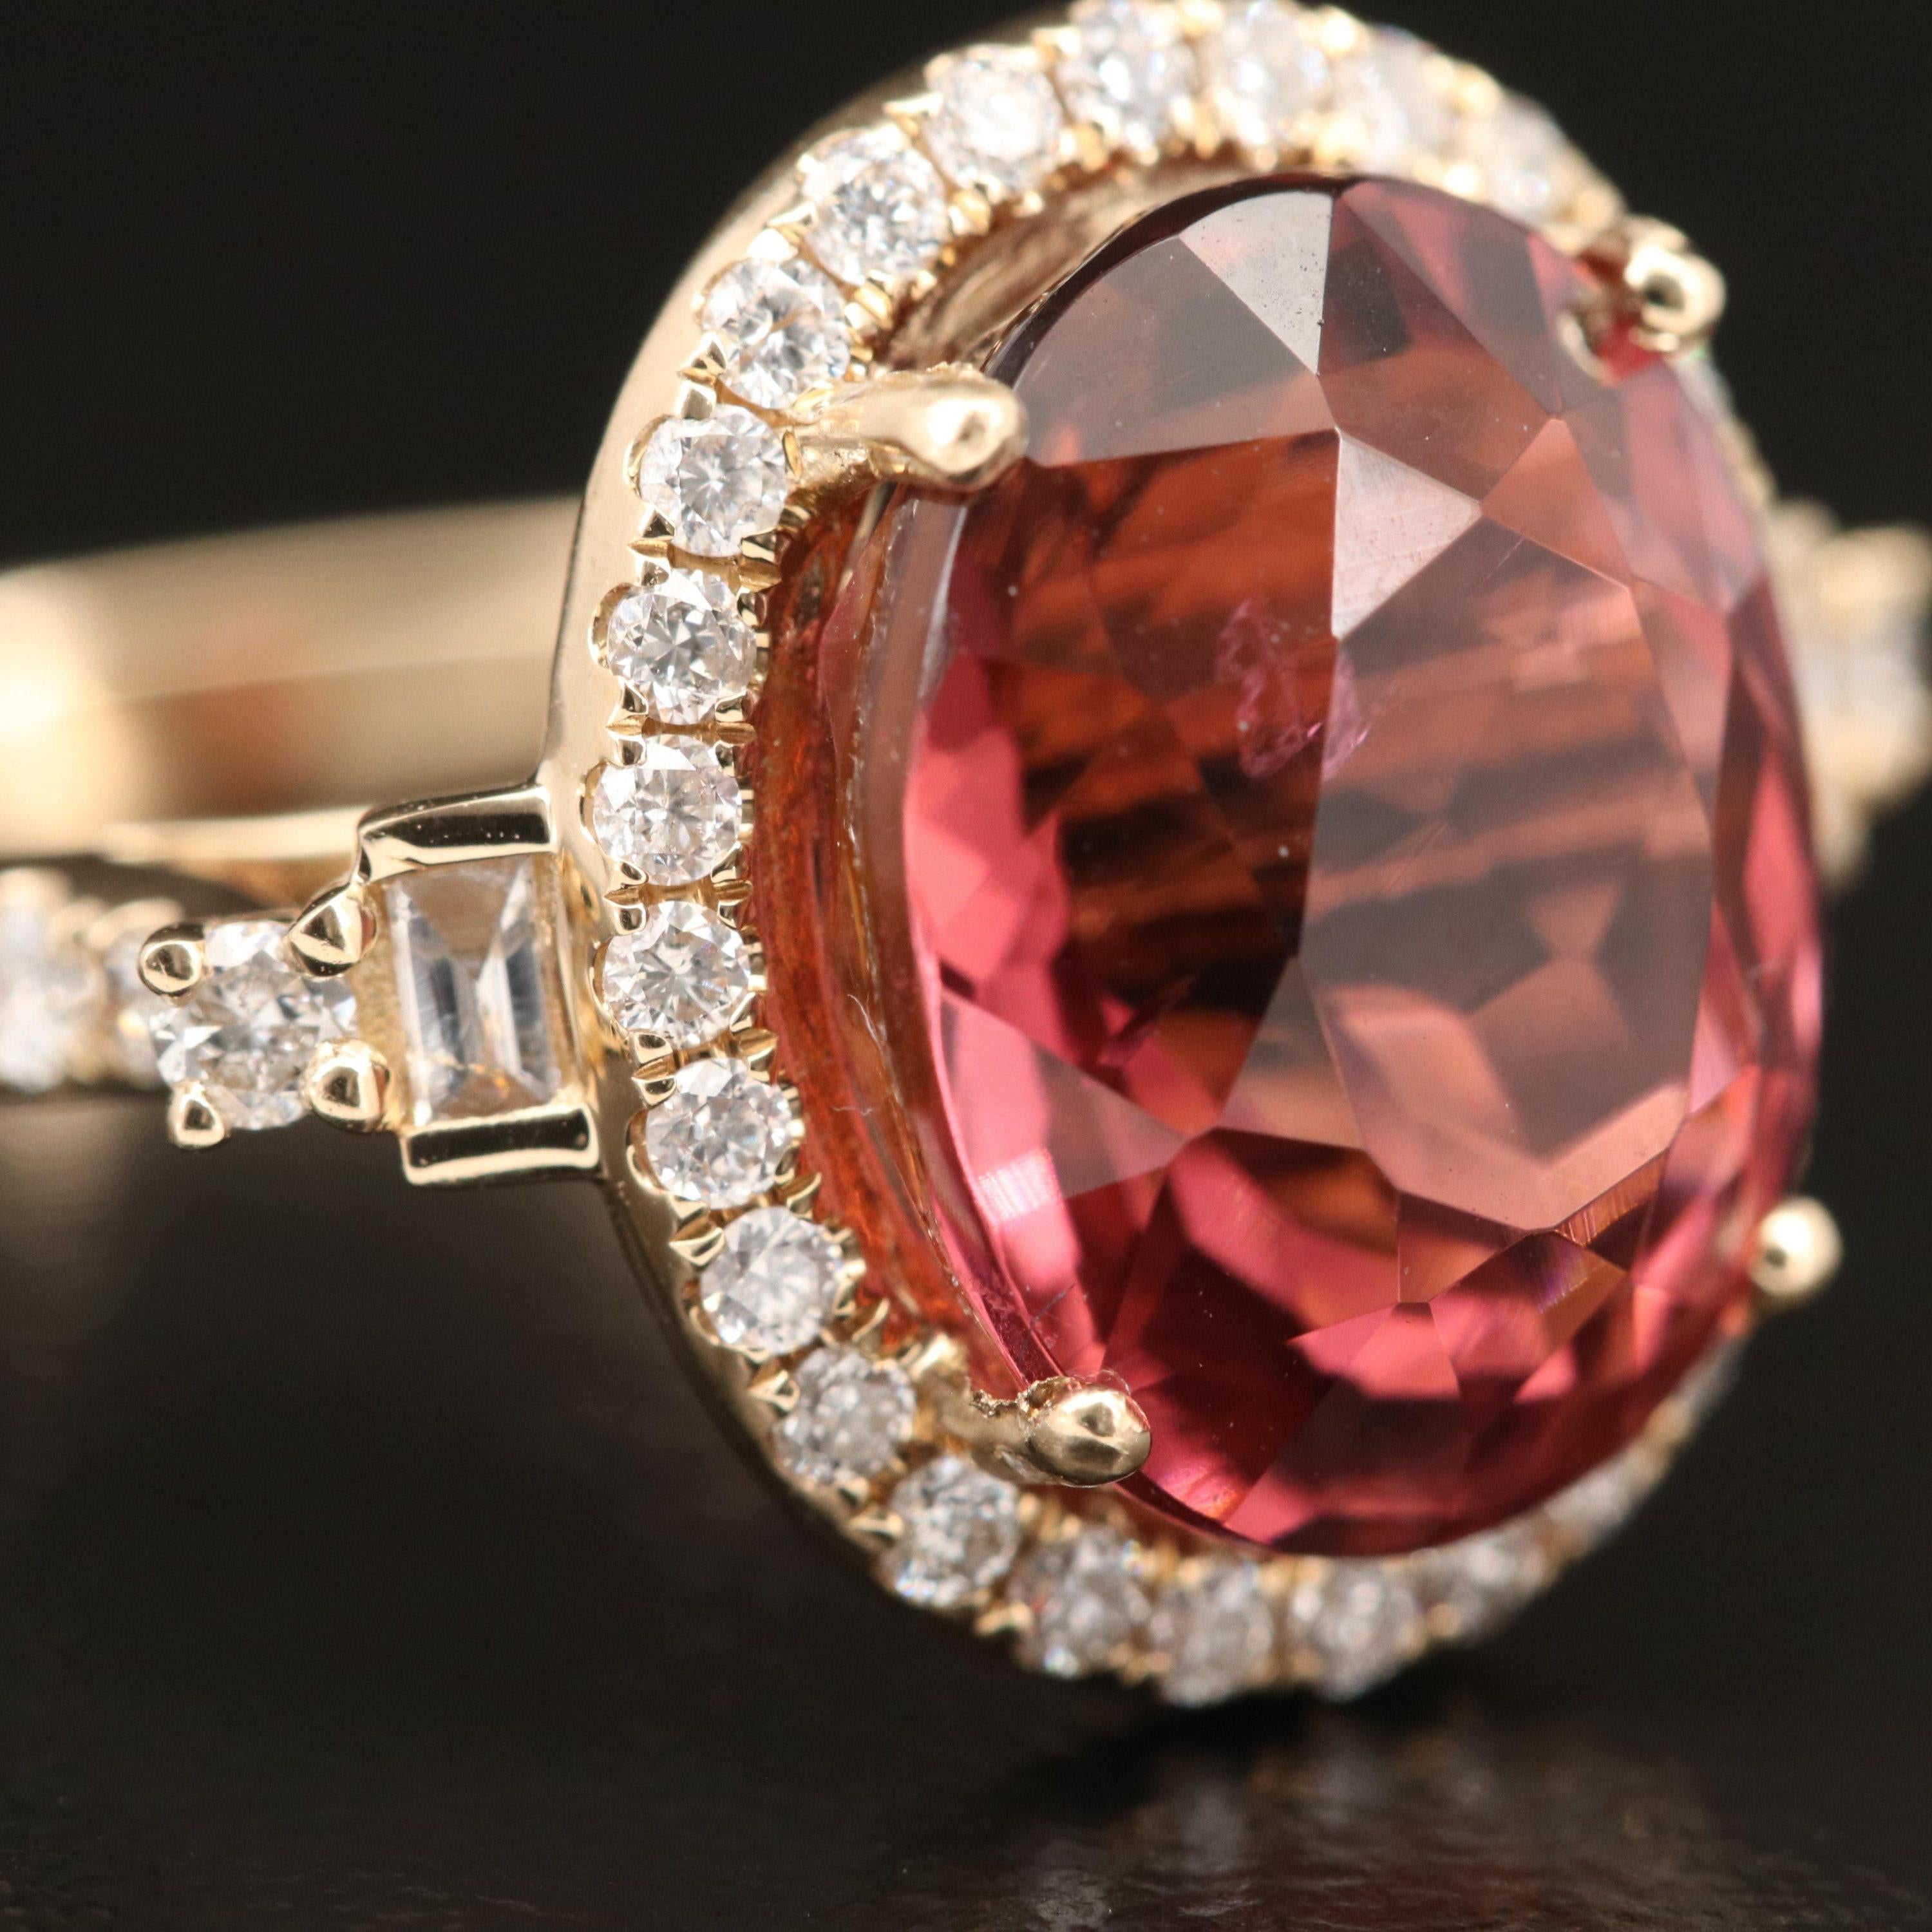 For Sale:  6.3 Carat Oval Cut Rubellite Tourmaline Bridal Promise Ring Halo Tourmaline Ring 2